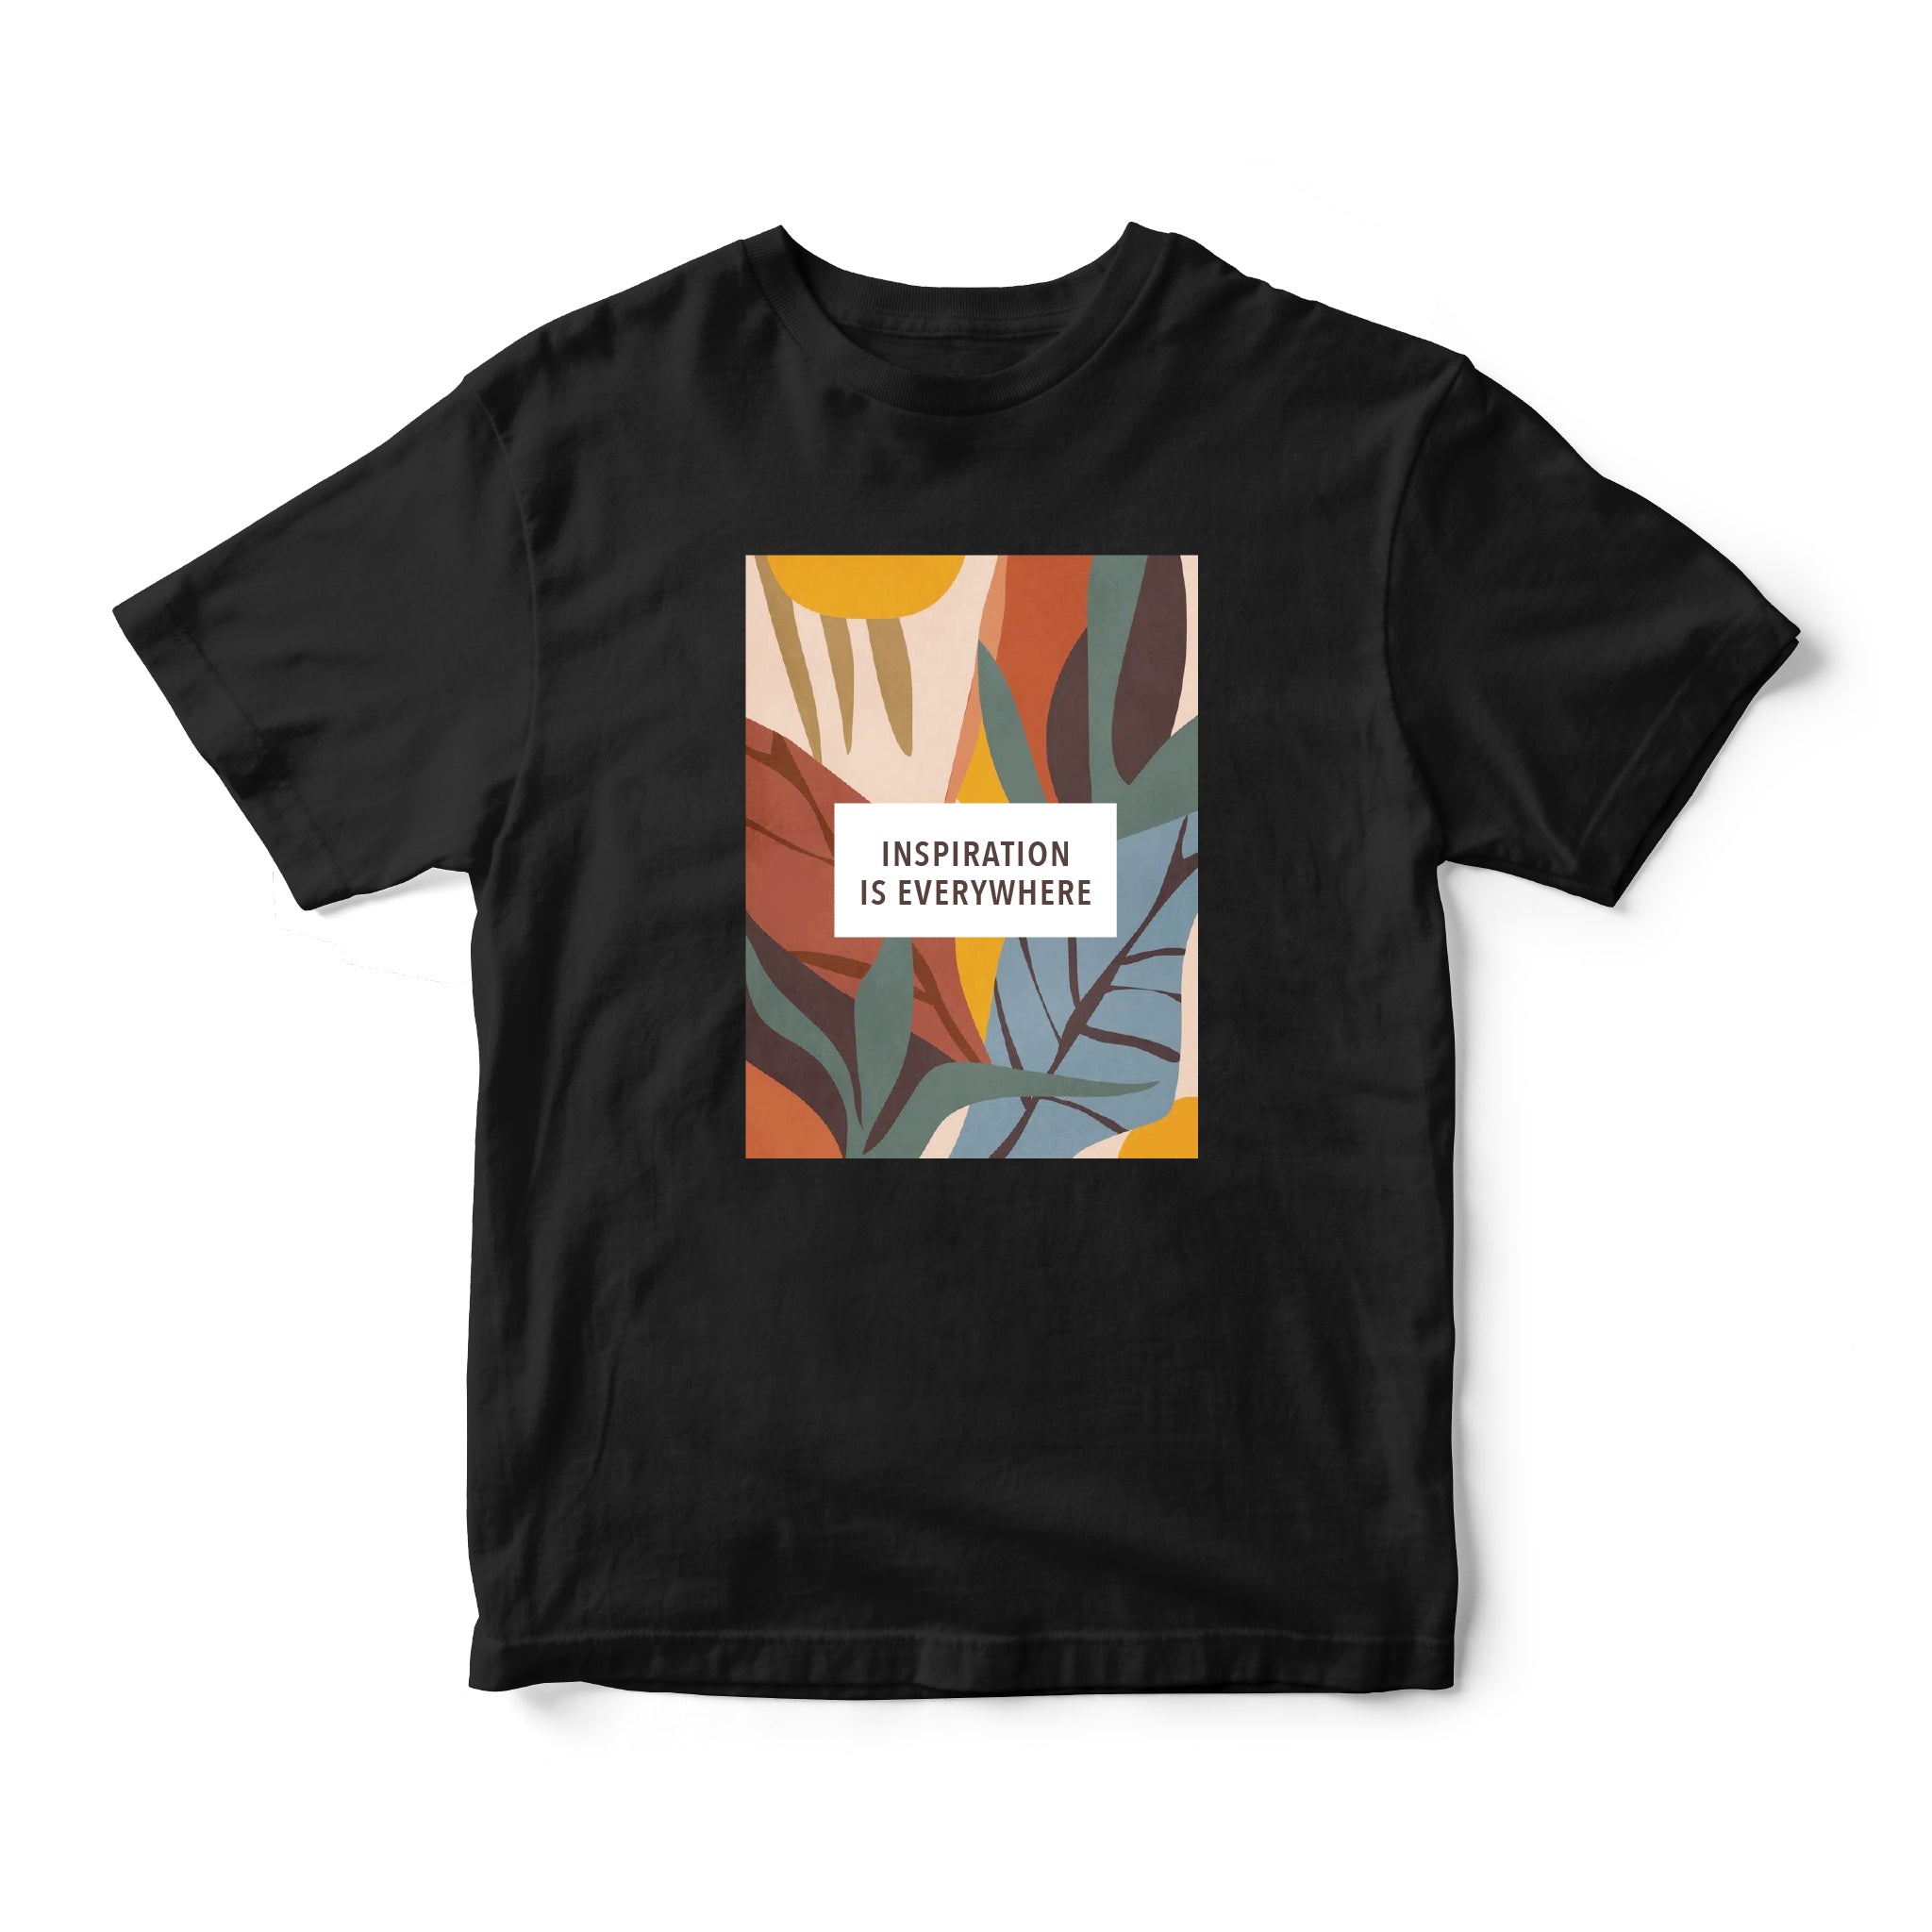 Instee Inspiration is Everywhere T-shirt Unisex 100% Cotton